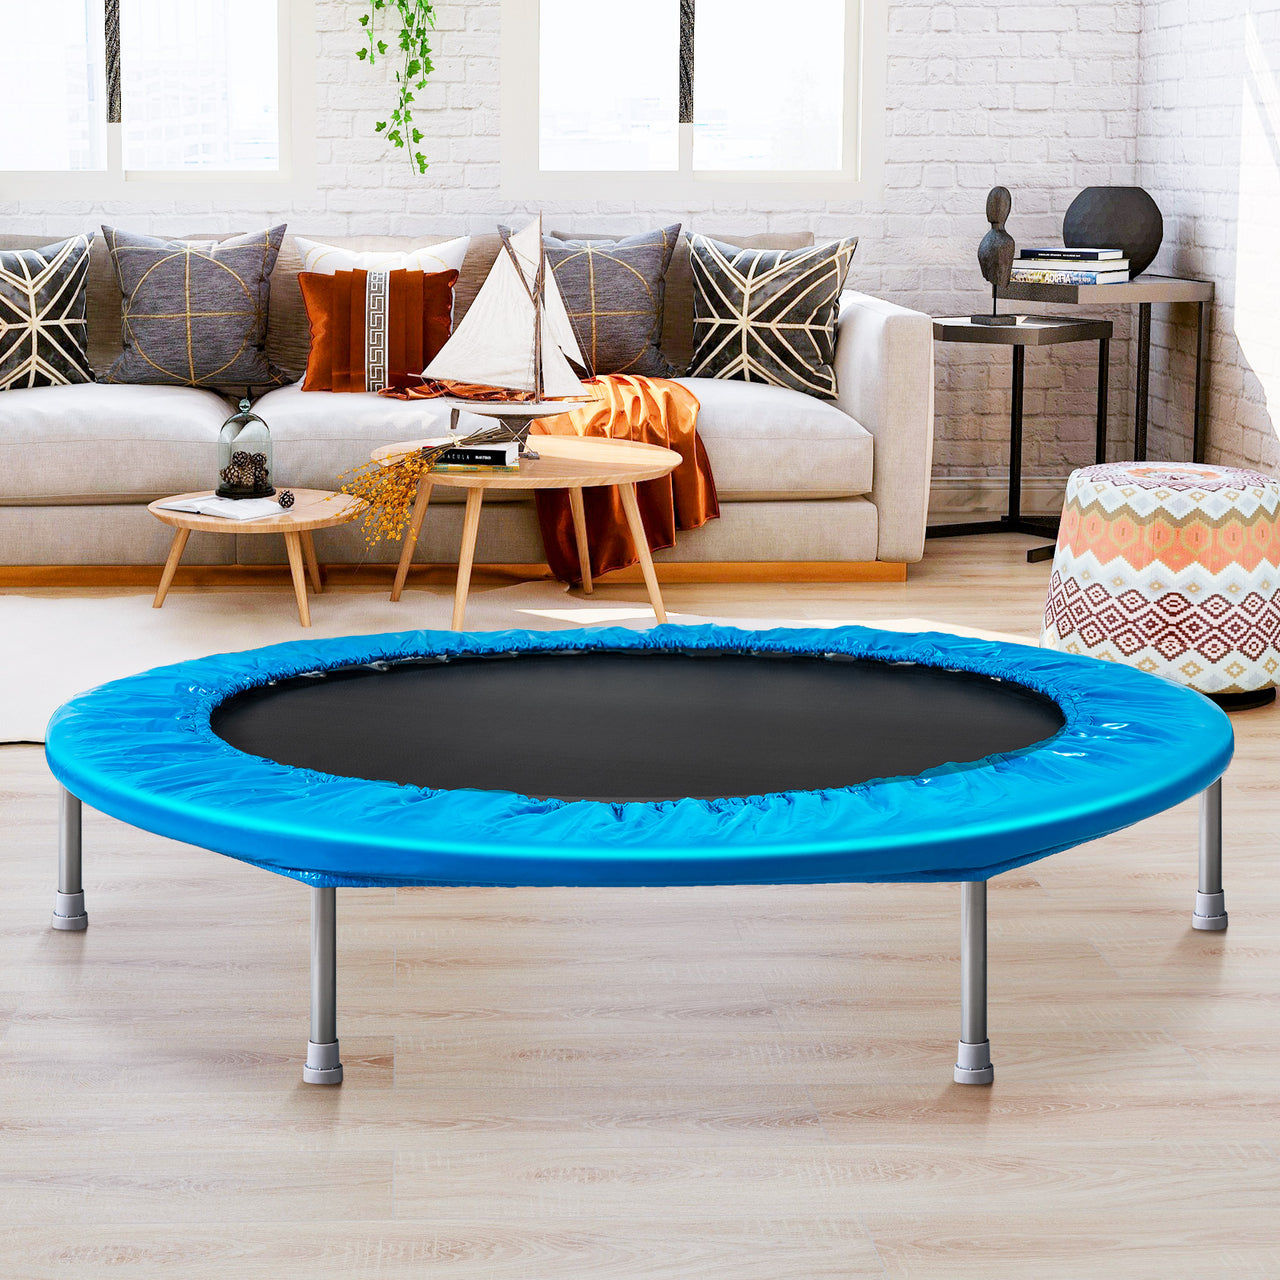 45 INCH TRAMPOLINE Cover Pad With 5mm Foam